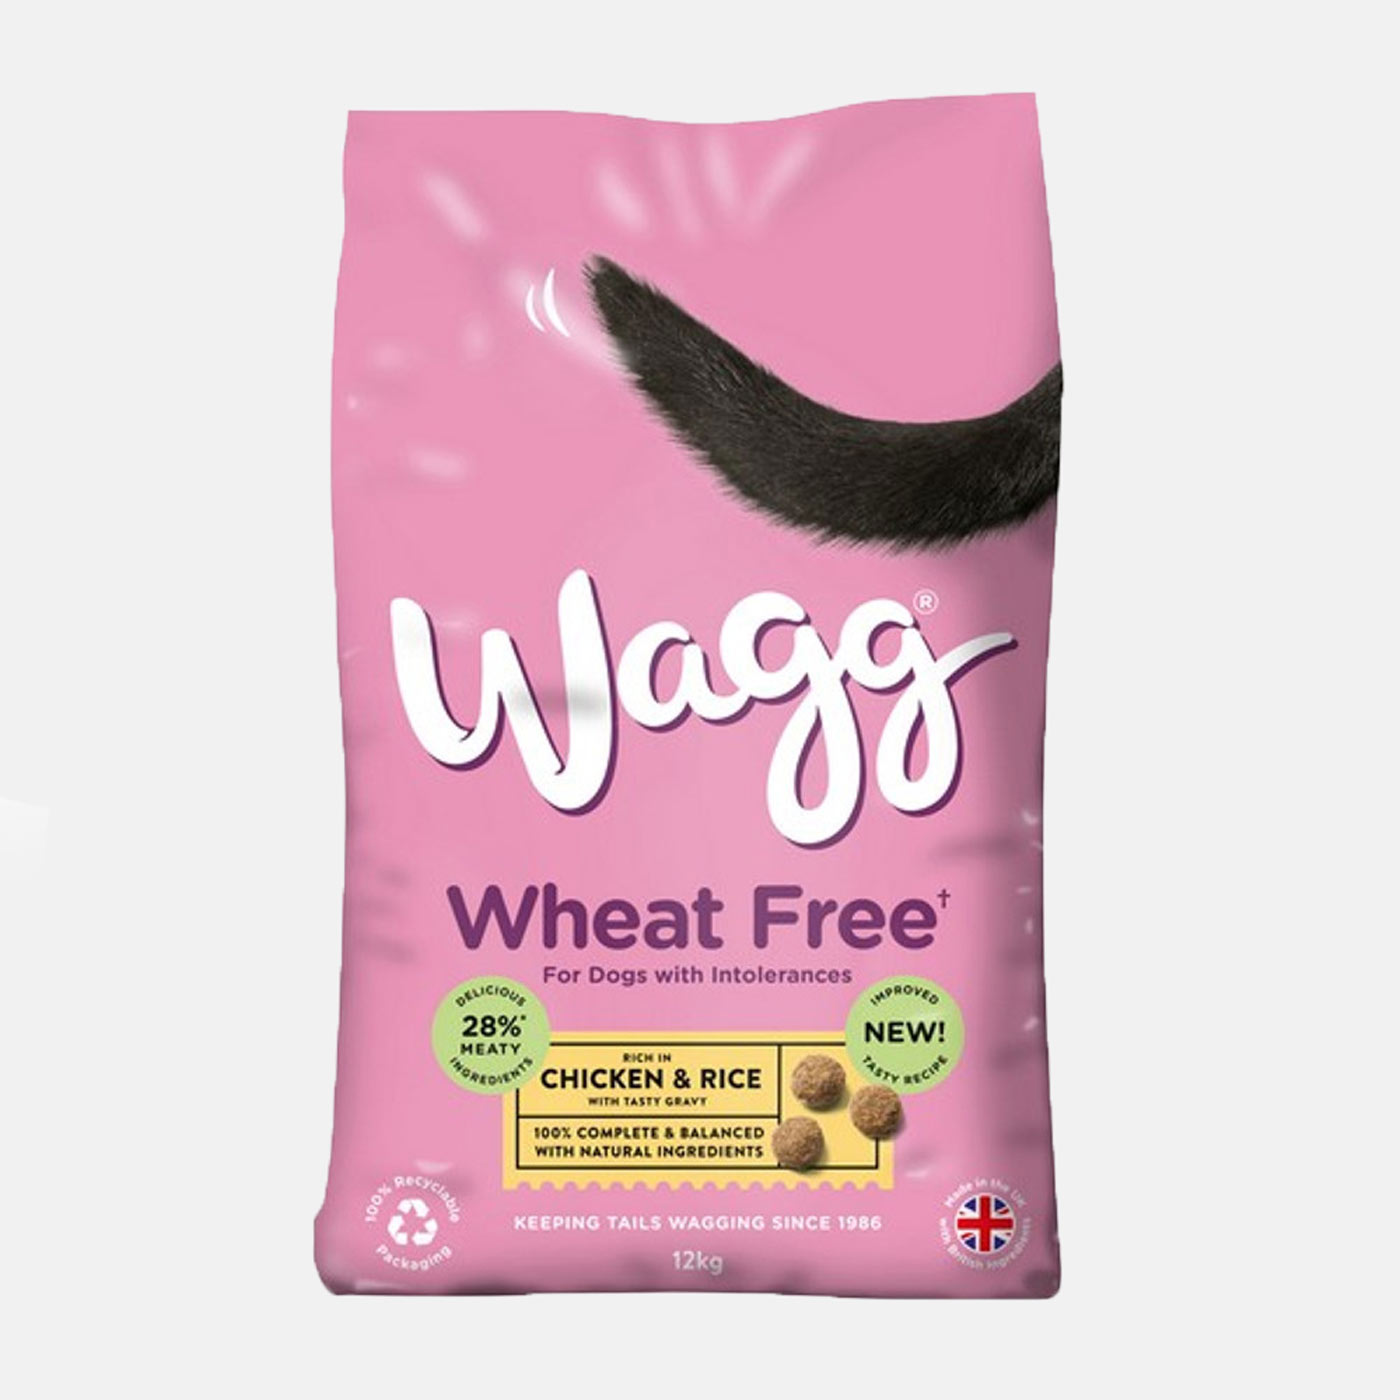 Wagg Wheat Free Dry Dog Food with Chicken & Rice 12kg